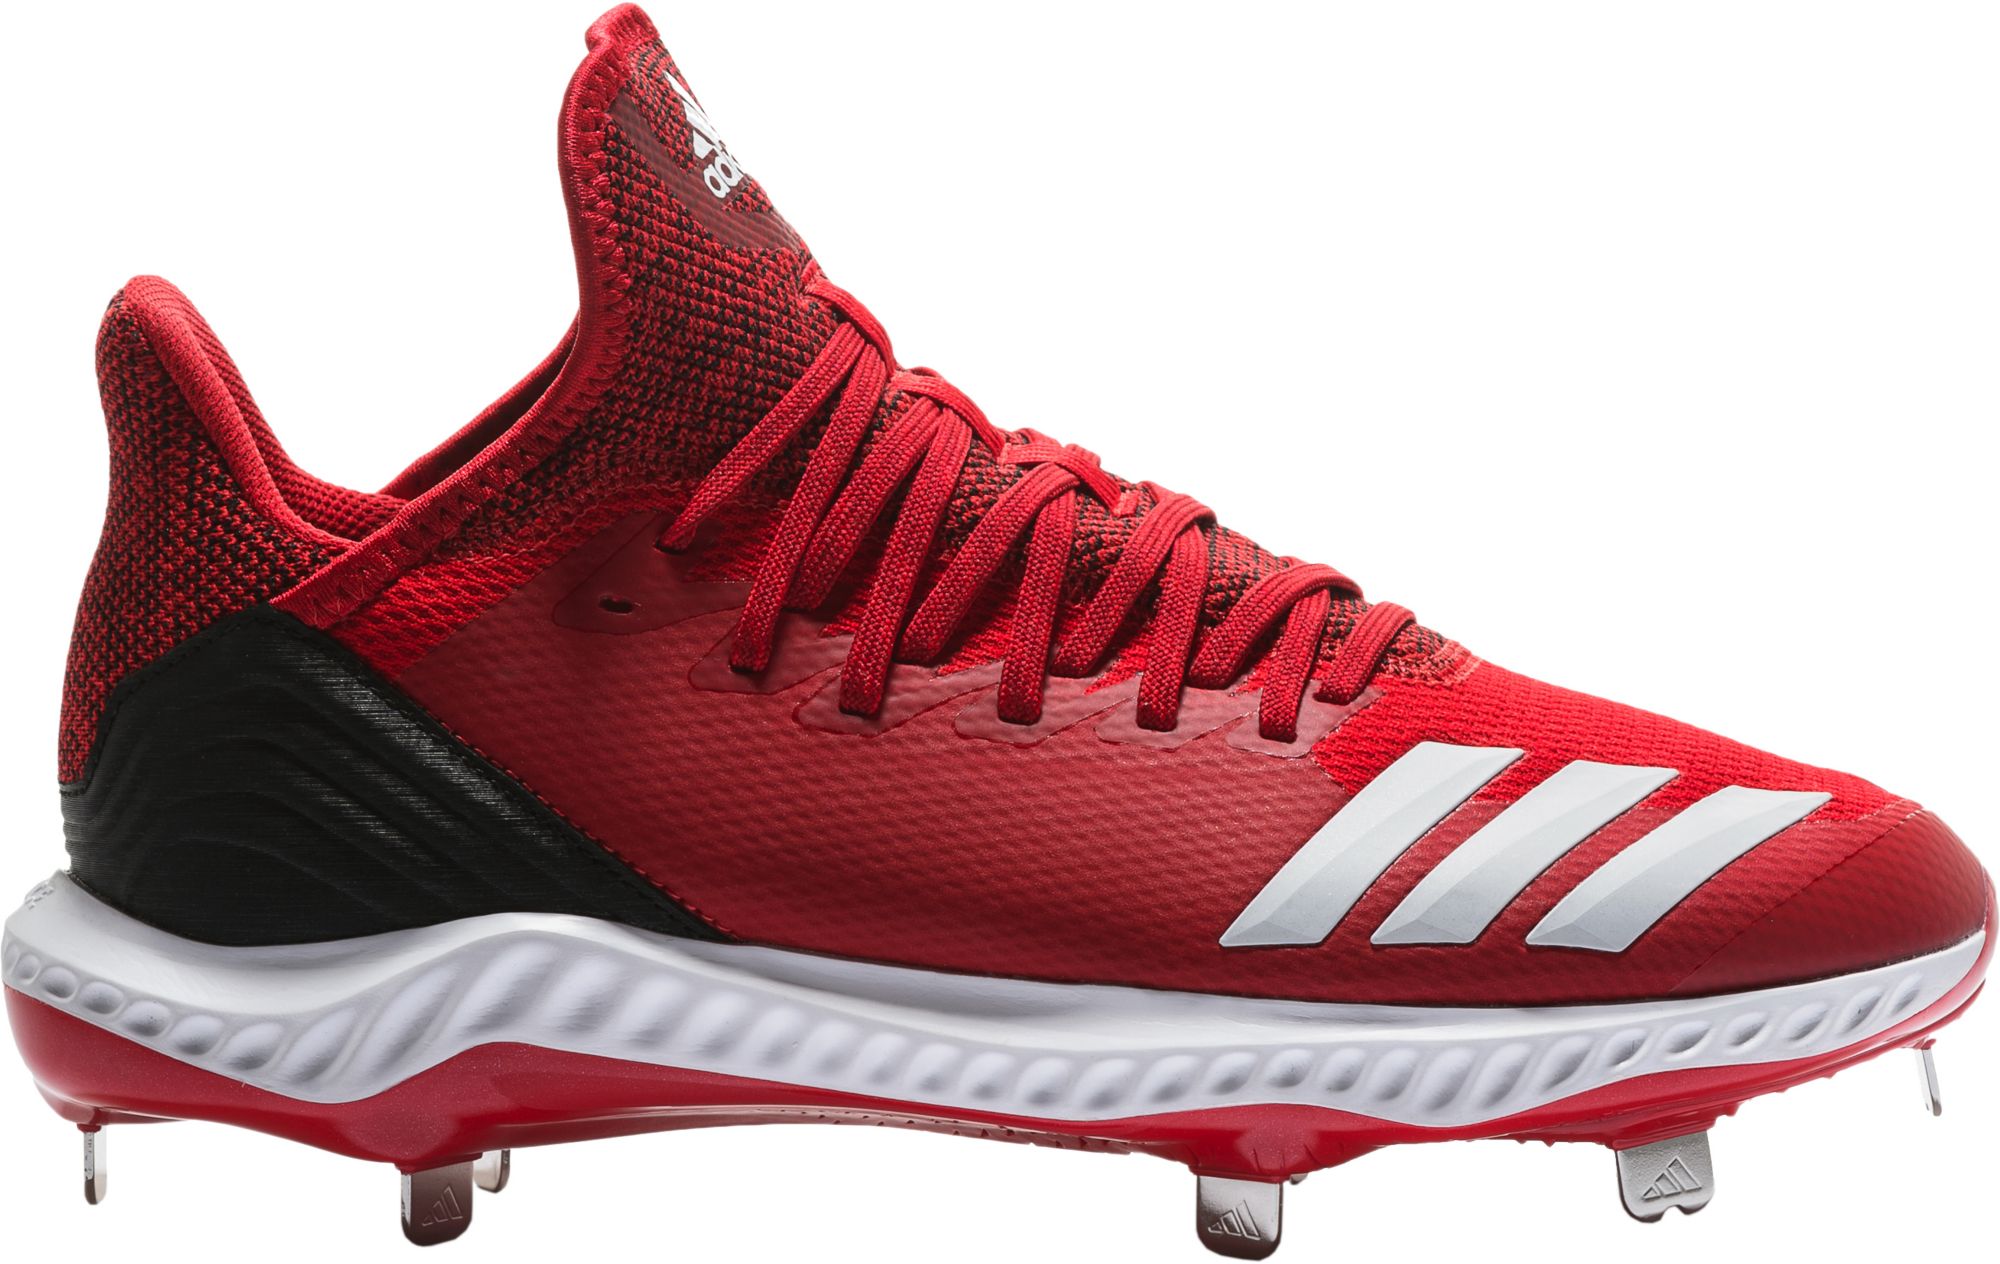 Red adidas Baseball Cleats | Best Price 